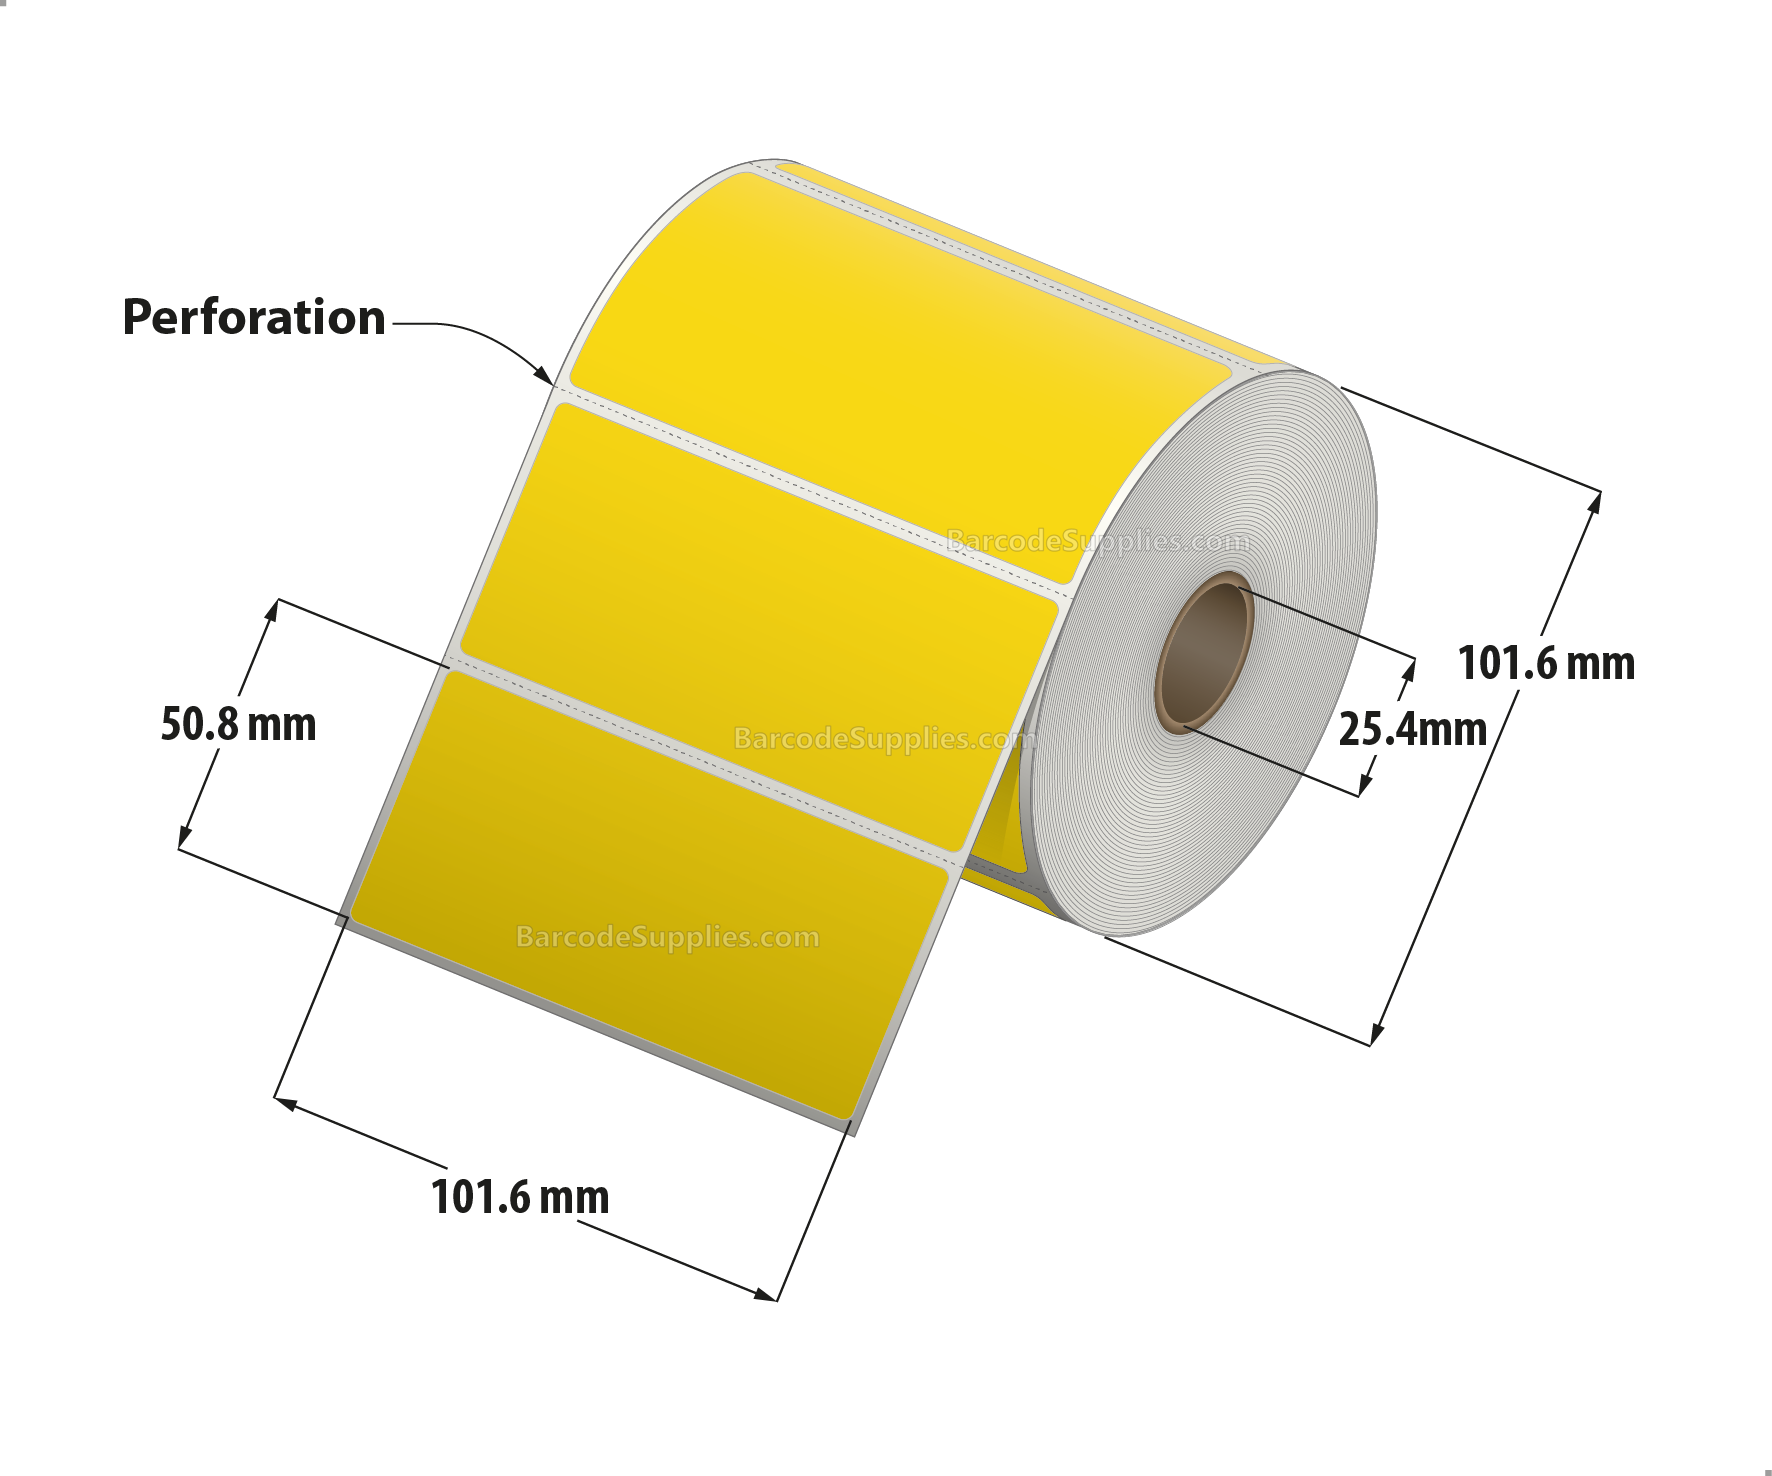 4 x 2 Direct Thermal Yellow Labels With Acrylic Adhesive - Perforated - 735 Labels Per Roll - Carton Of 12 Rolls - 8820 Labels Total - MPN: RD-4-2-735-YL